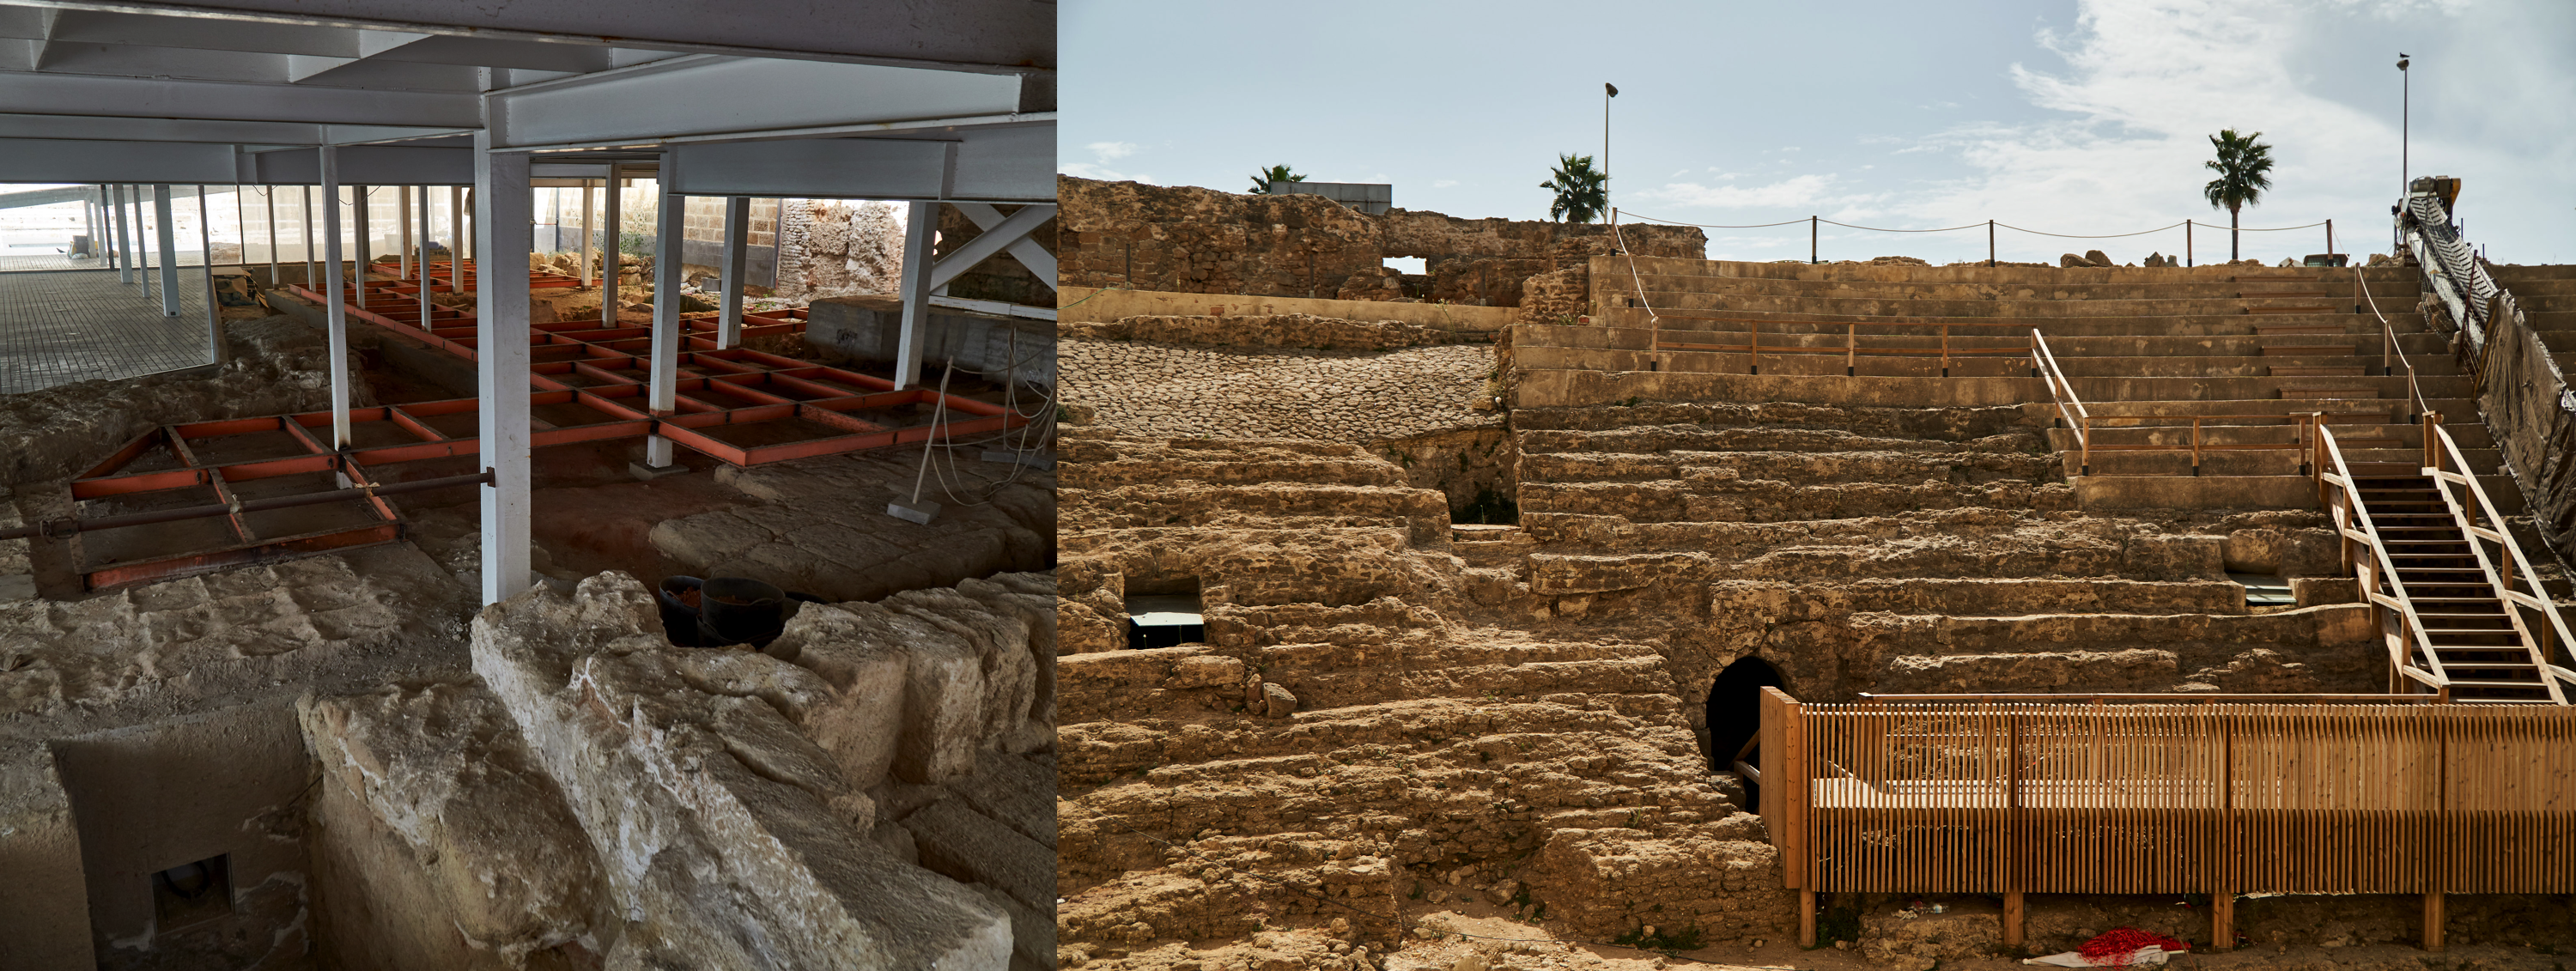 Phoenician buildings and parts of the roman theater